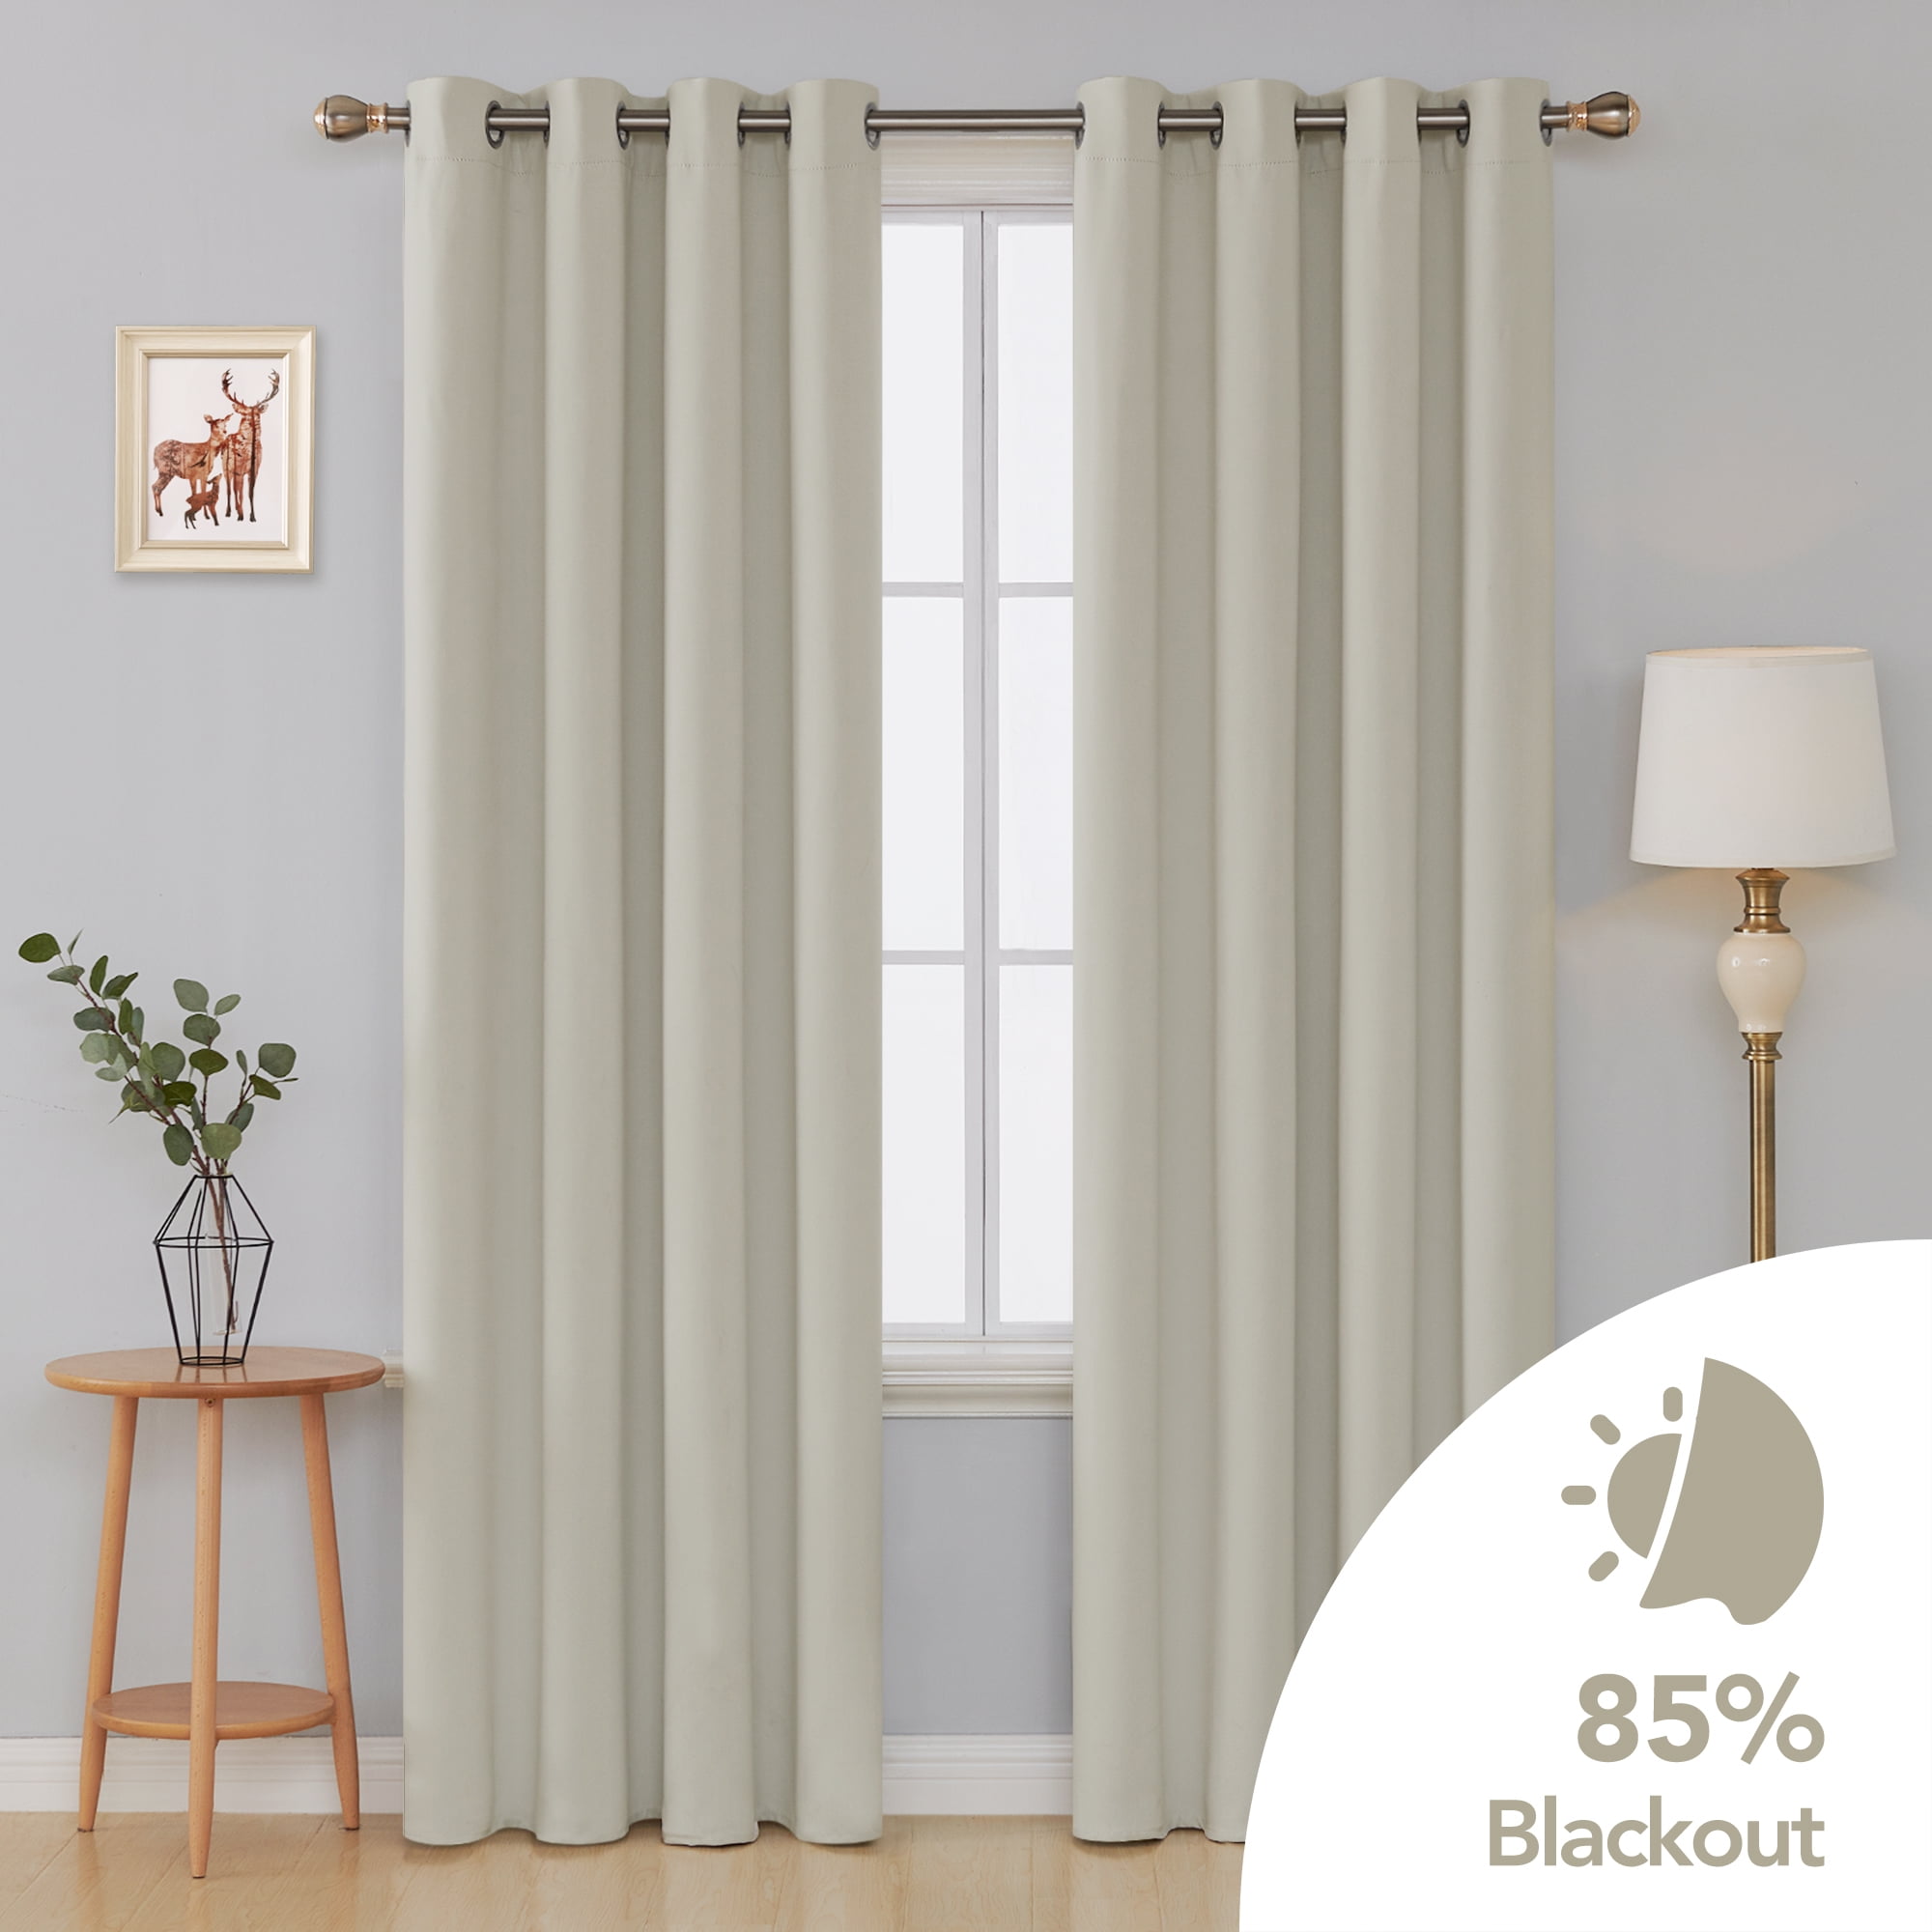 Deconovo Decorative Blackout Curtains Room Darkening Thermal Insulated Grommet Top Drapes with Silver Back for Living Room 52 by 63 Inch Beige 2 Panels 